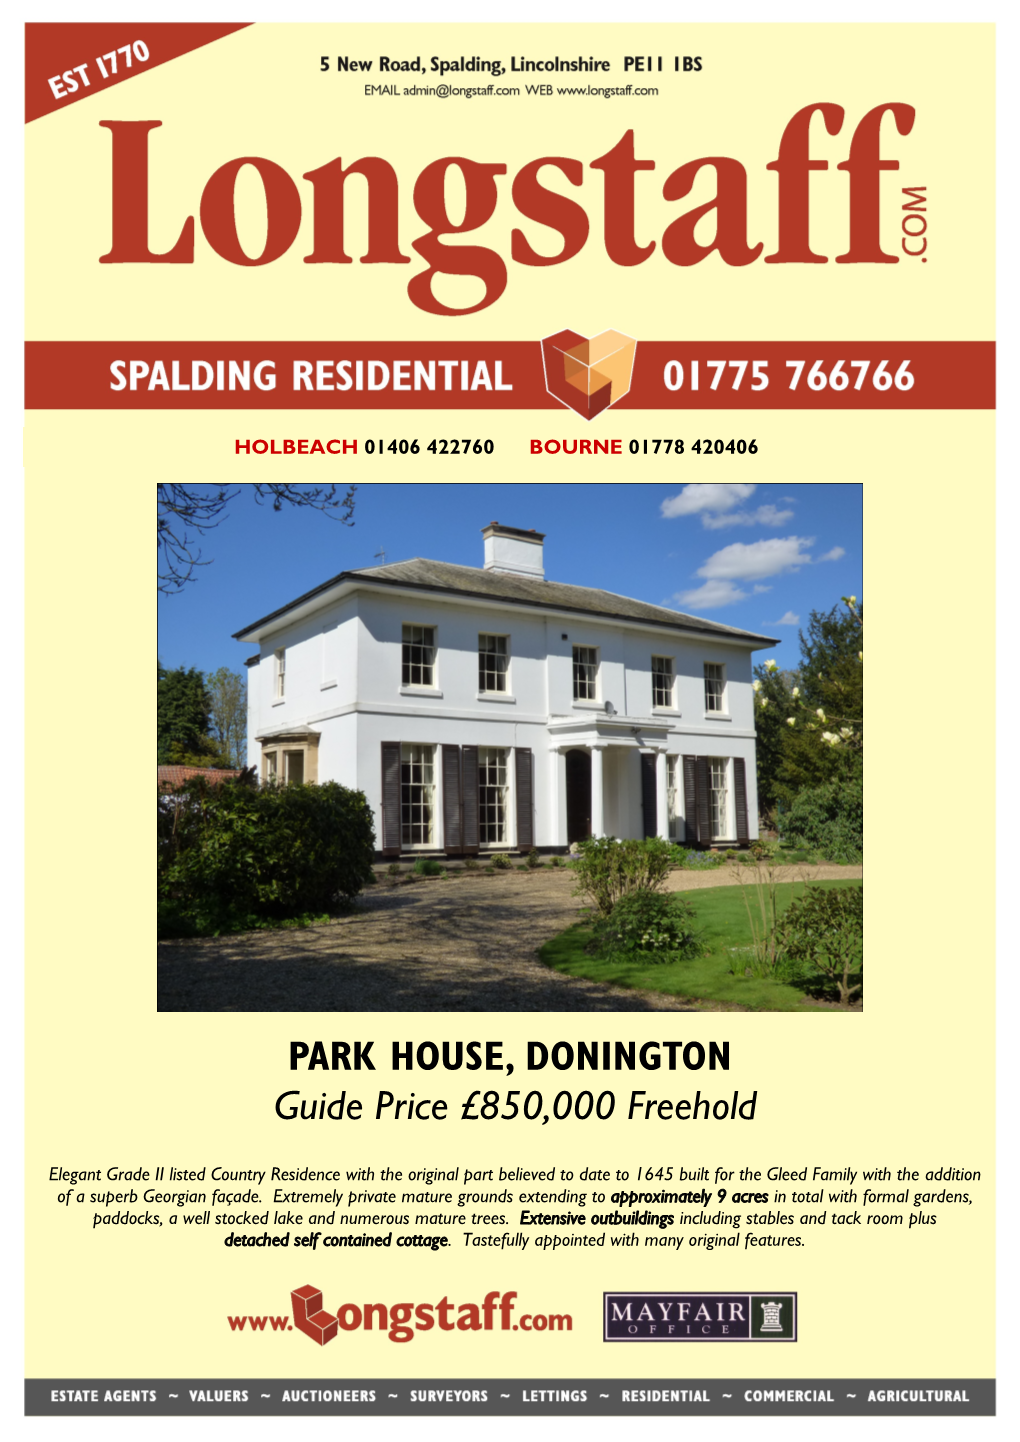 PARK HOUSE, DONINGTON Guide Price £850,000 Freehold